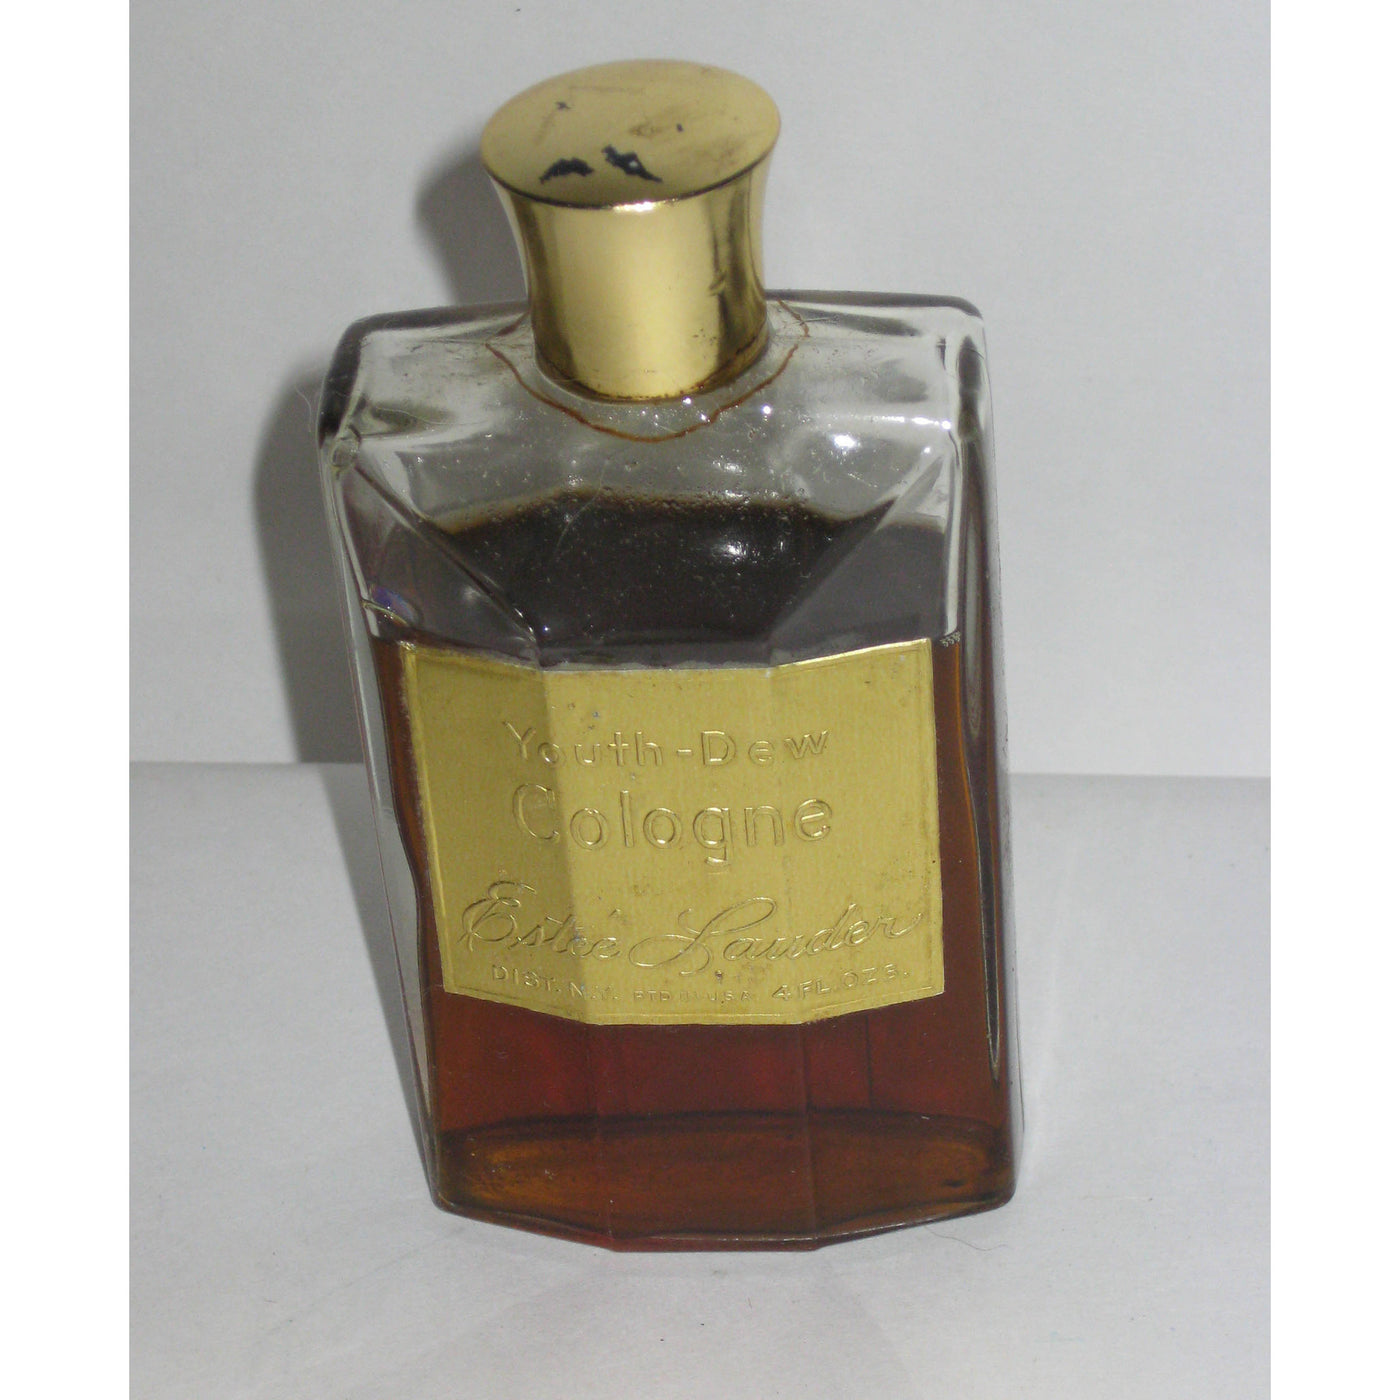 Vintage Youth Dew Cologne By Estee Lauder 